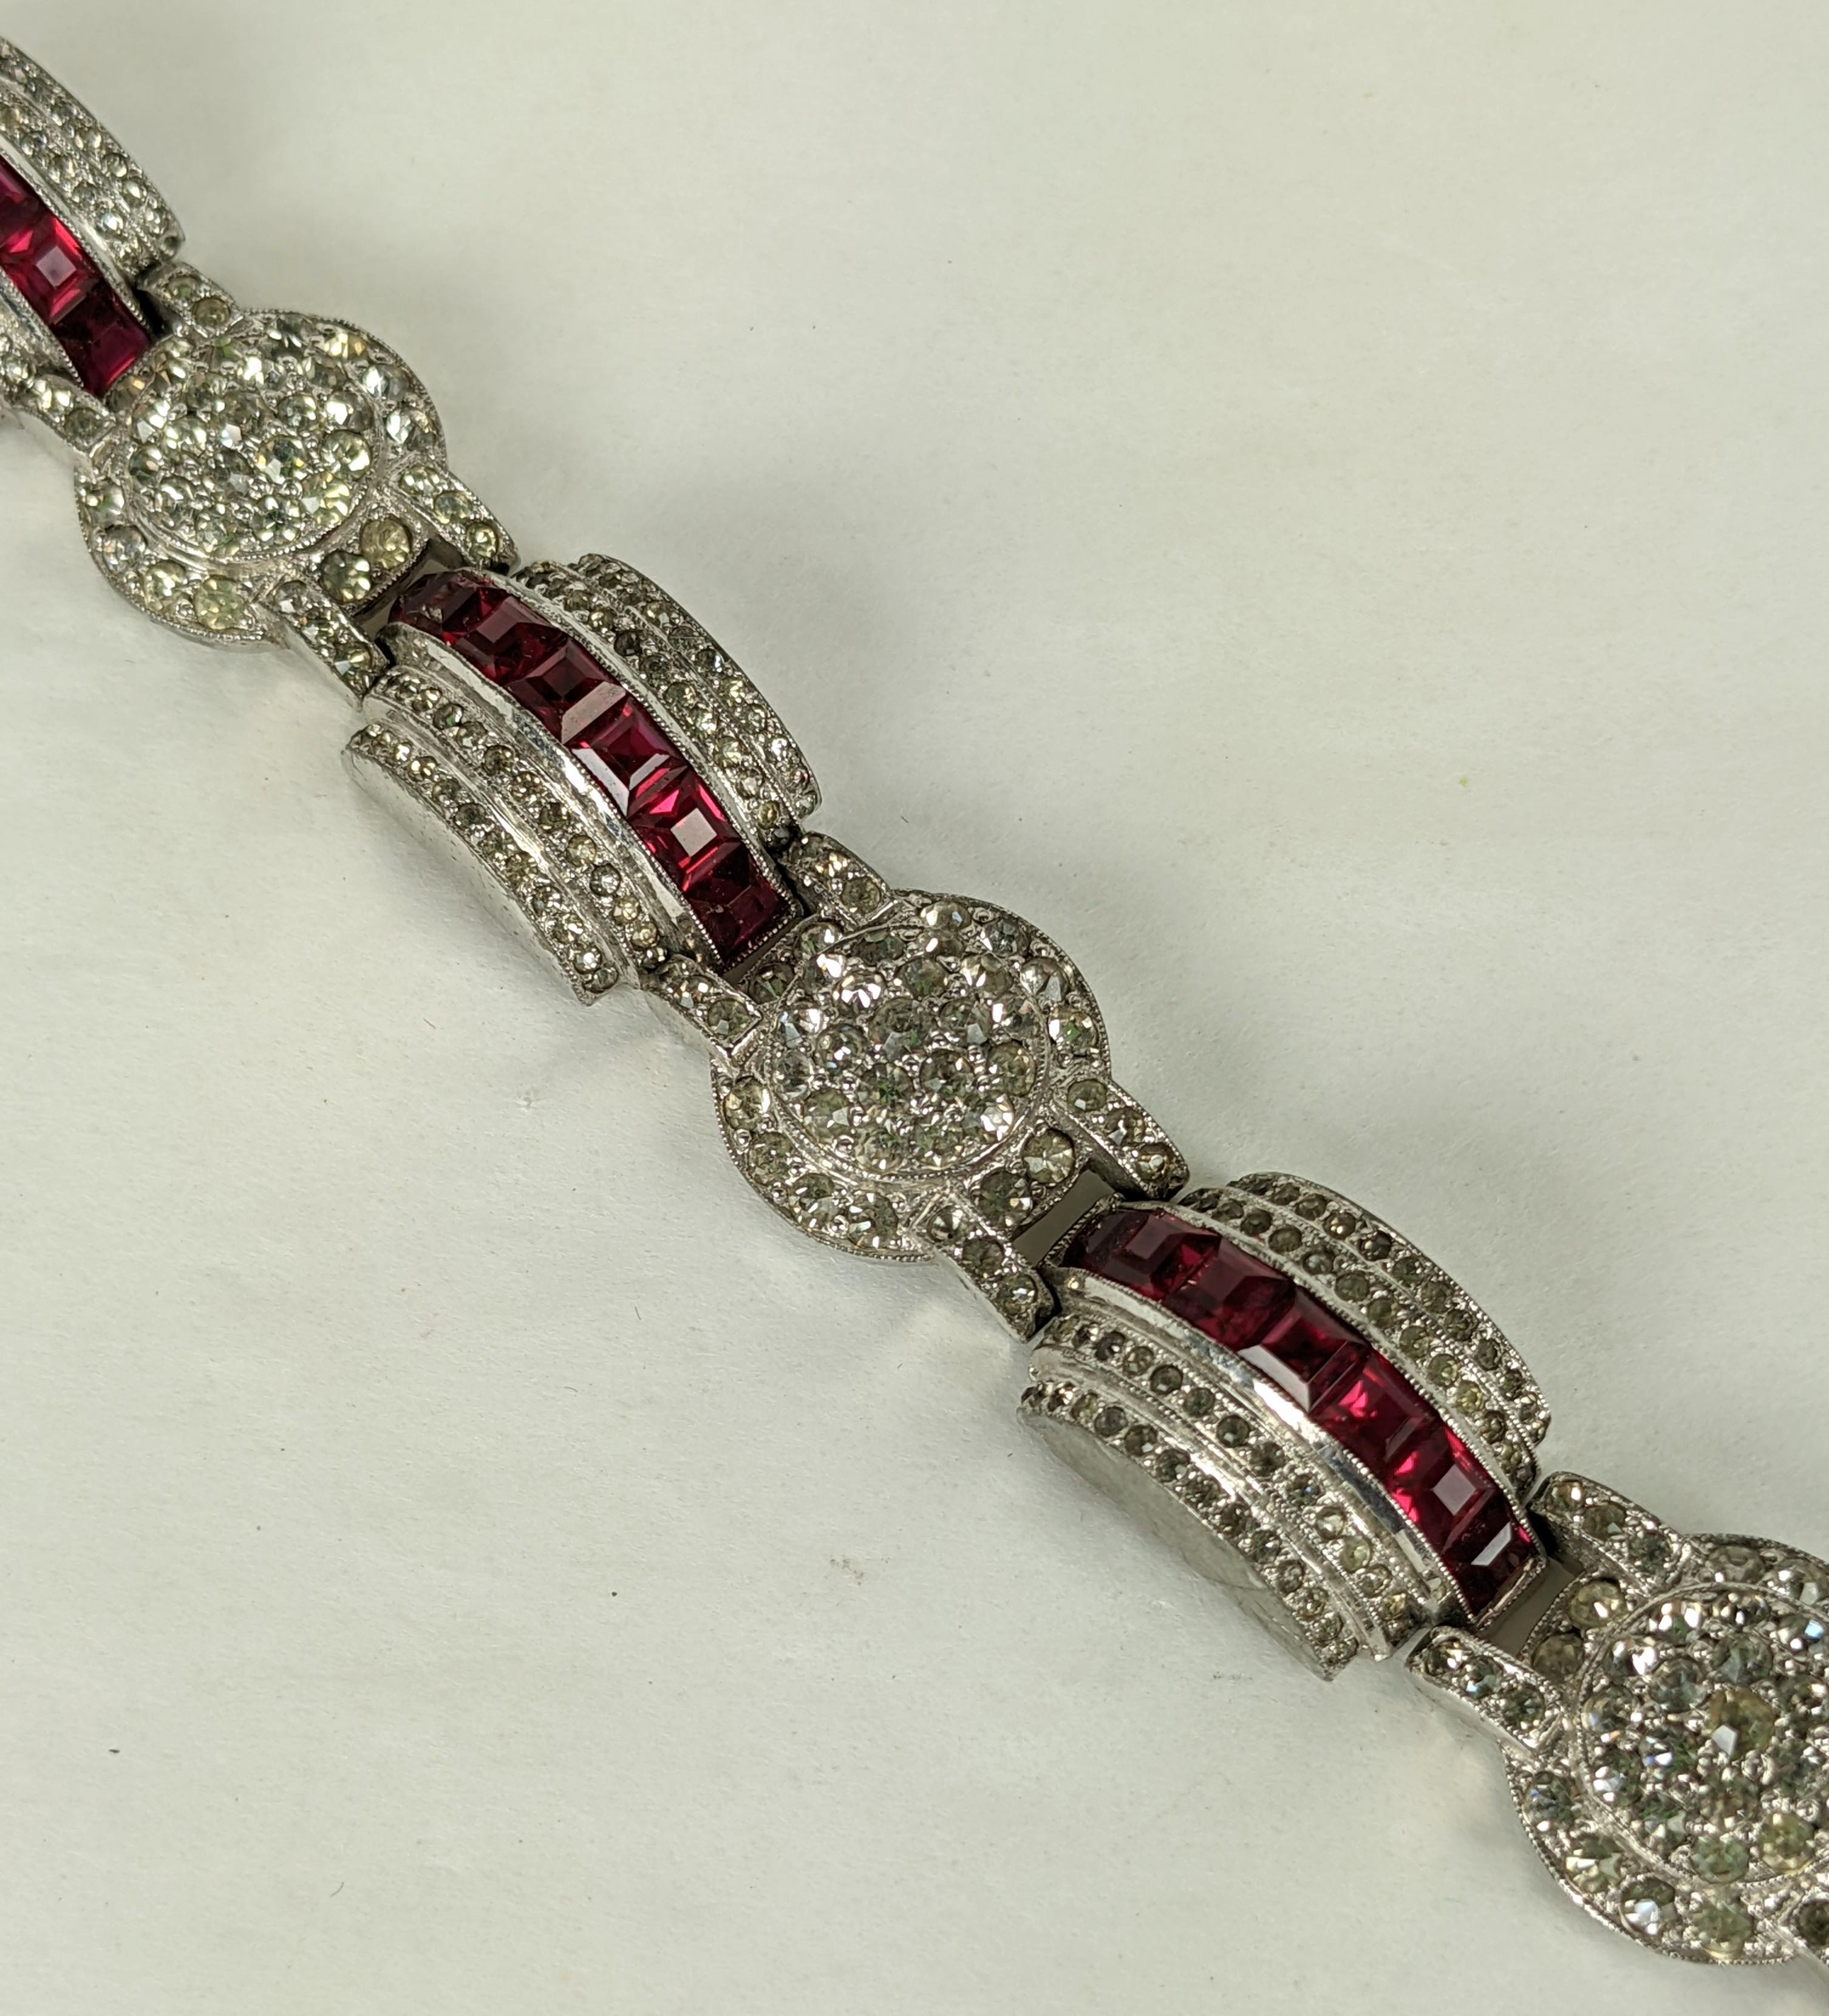 Wonderful Art Deco Pave and Channel Set Ruby Bracelet from the 1930's. Stepped and circular links are pave set with rhinestone crystals and  square cut ruby pastes are set across the top of the domed motifs. Elegant and dimensional. 1930's USA.   7